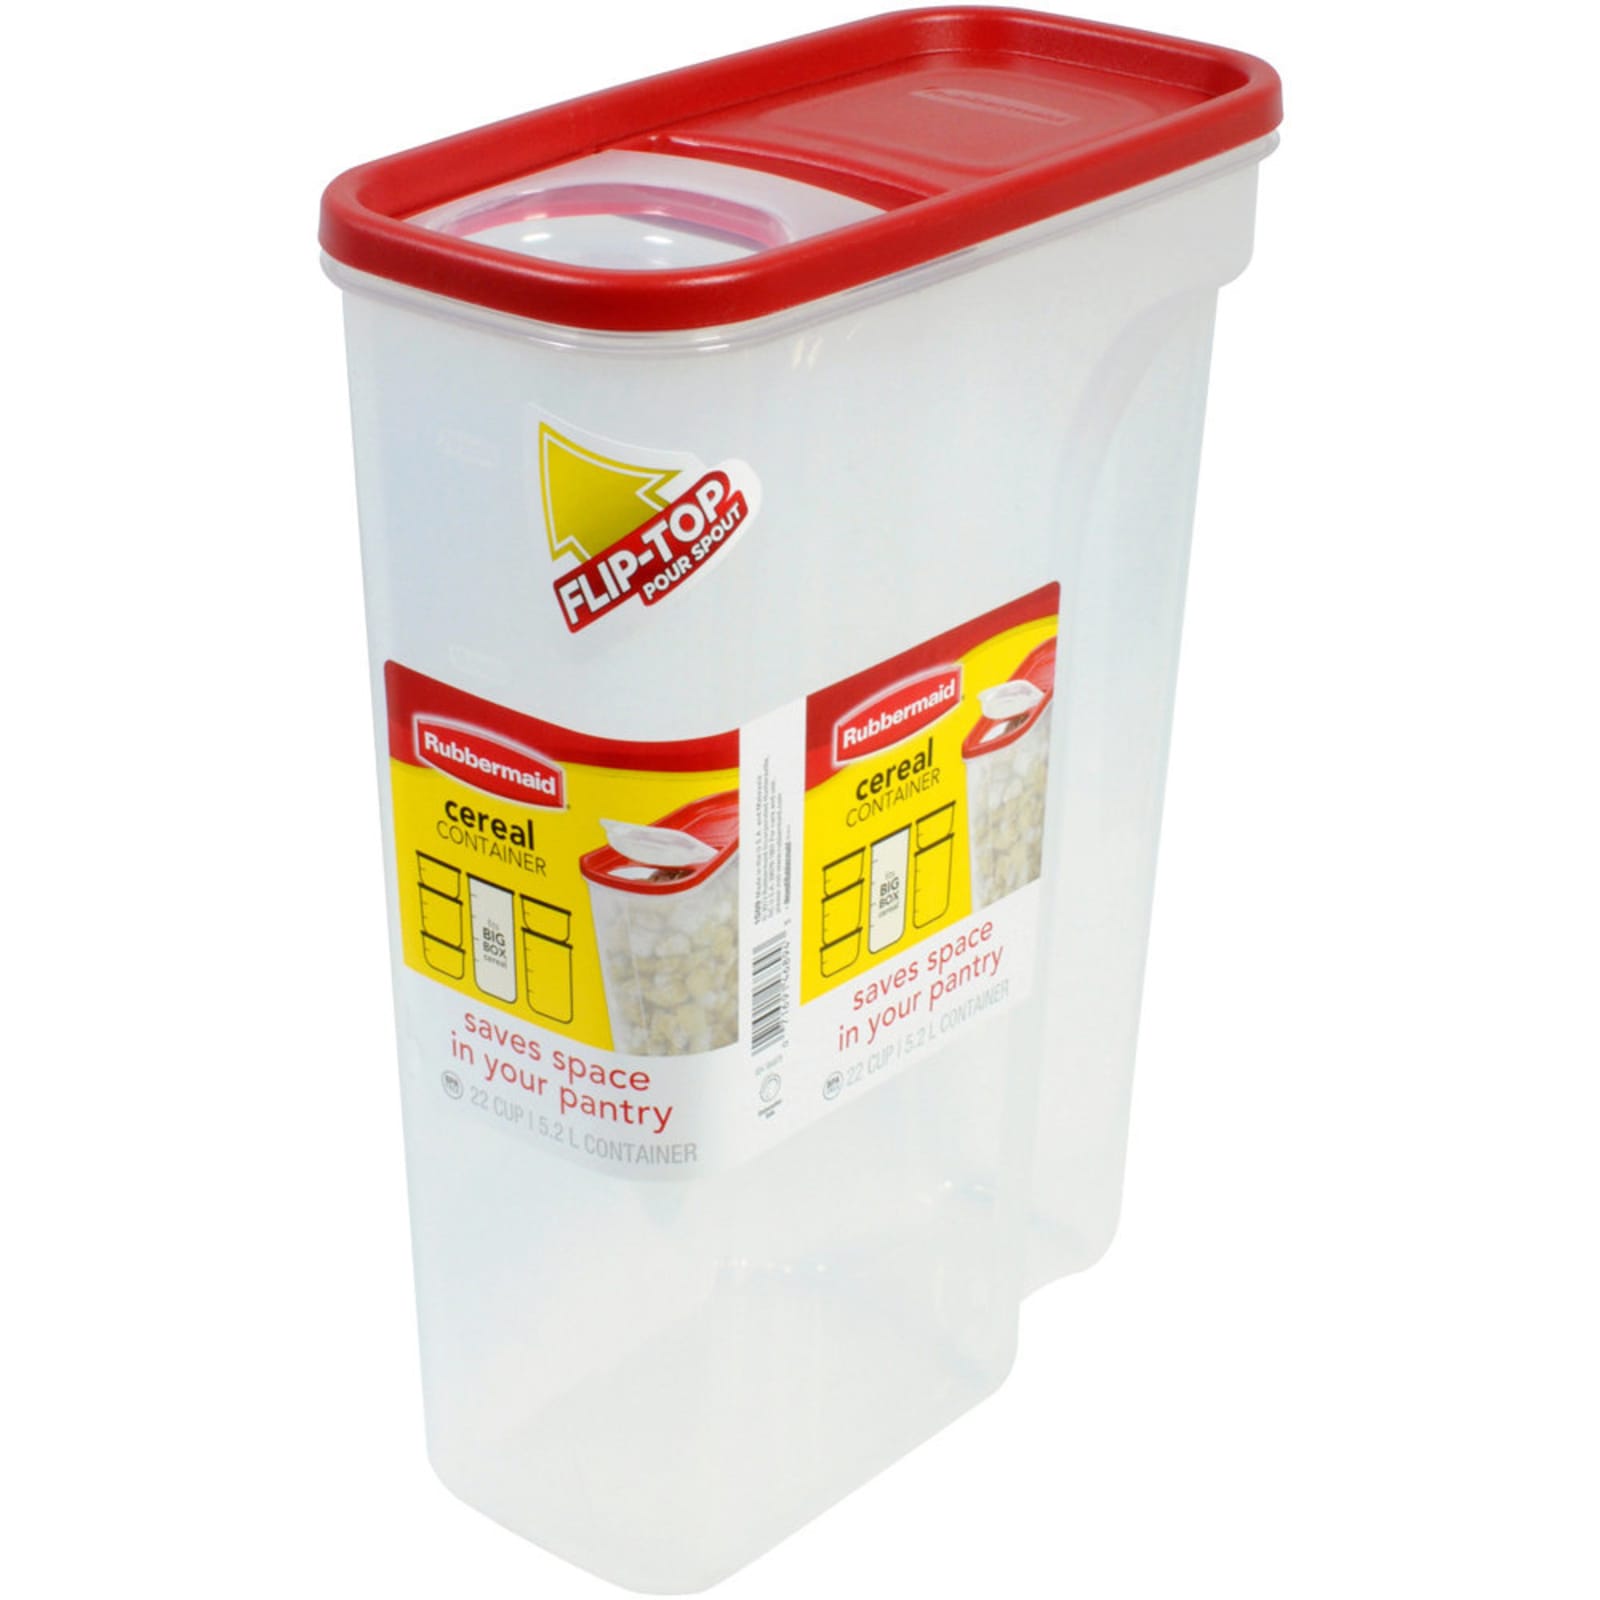 22 Cup Modular Cereal Container by Rubbermaid at Fleet Farm